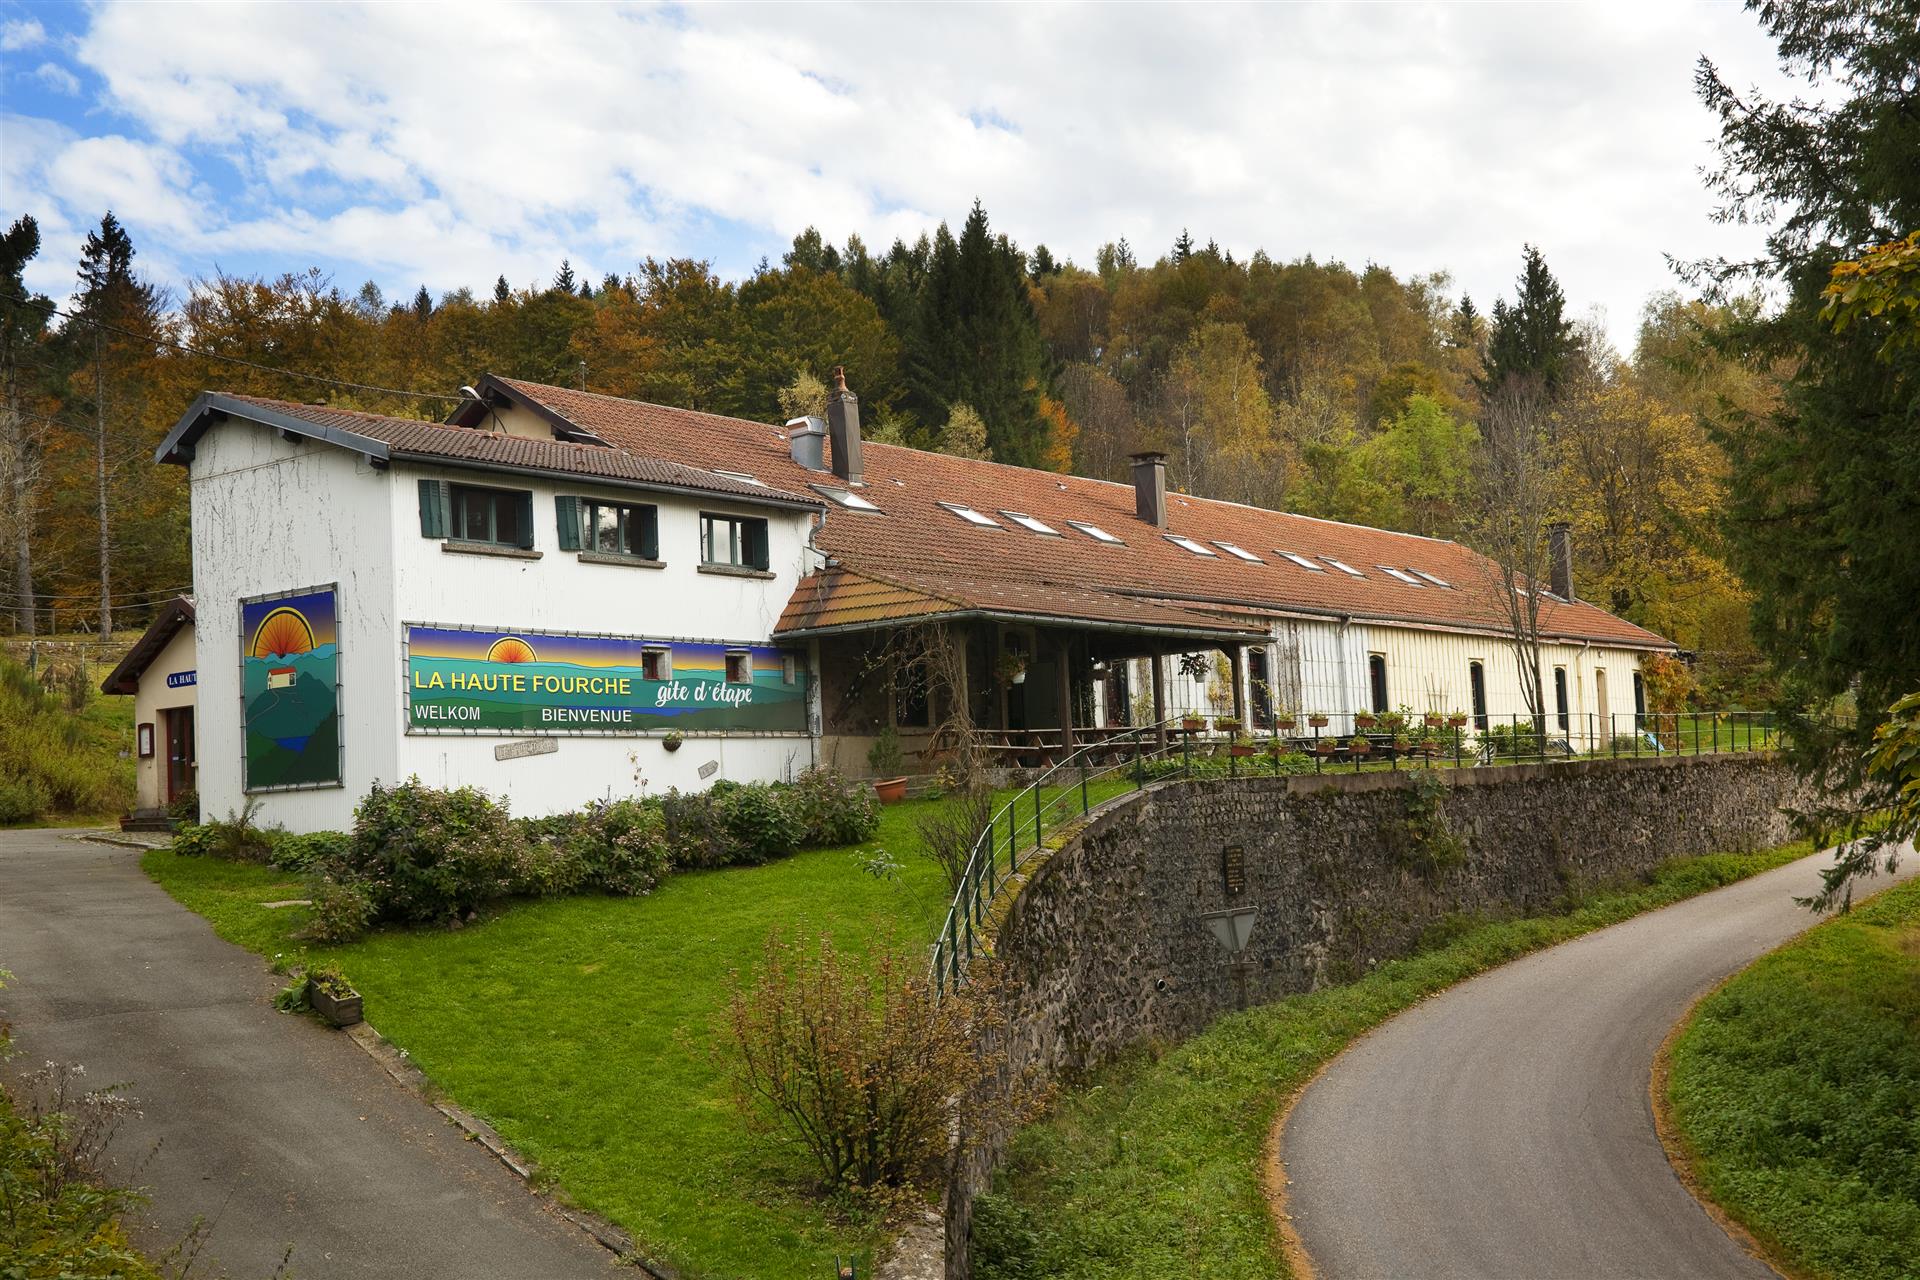 Voigezen Hostel and 2 holiday homes for sale